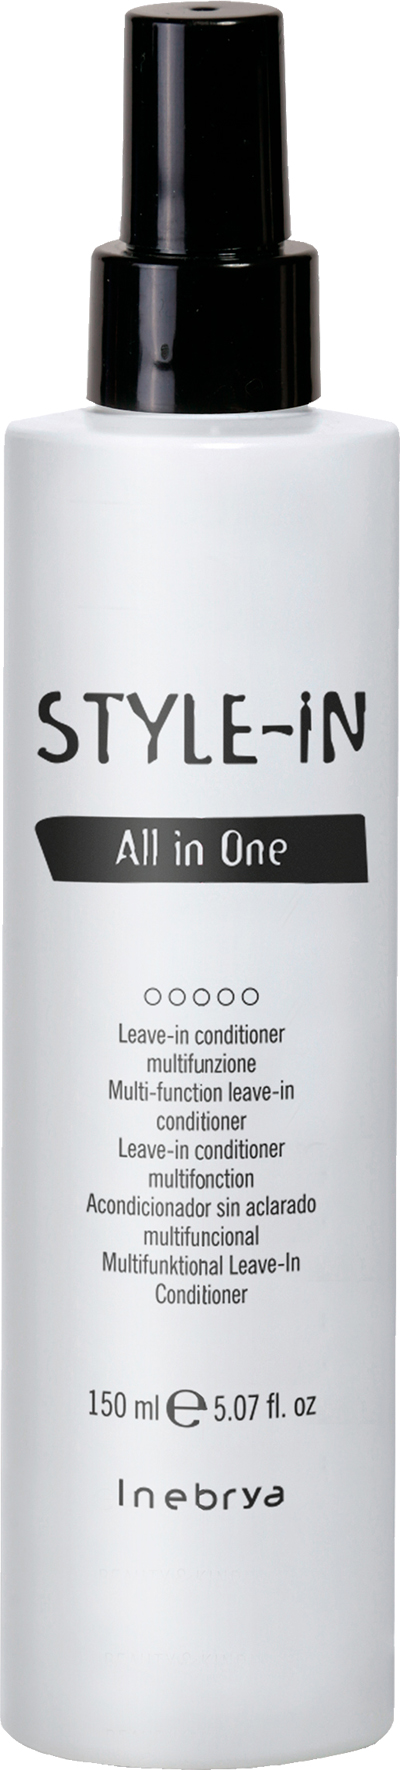 Style in All in one, 150ml